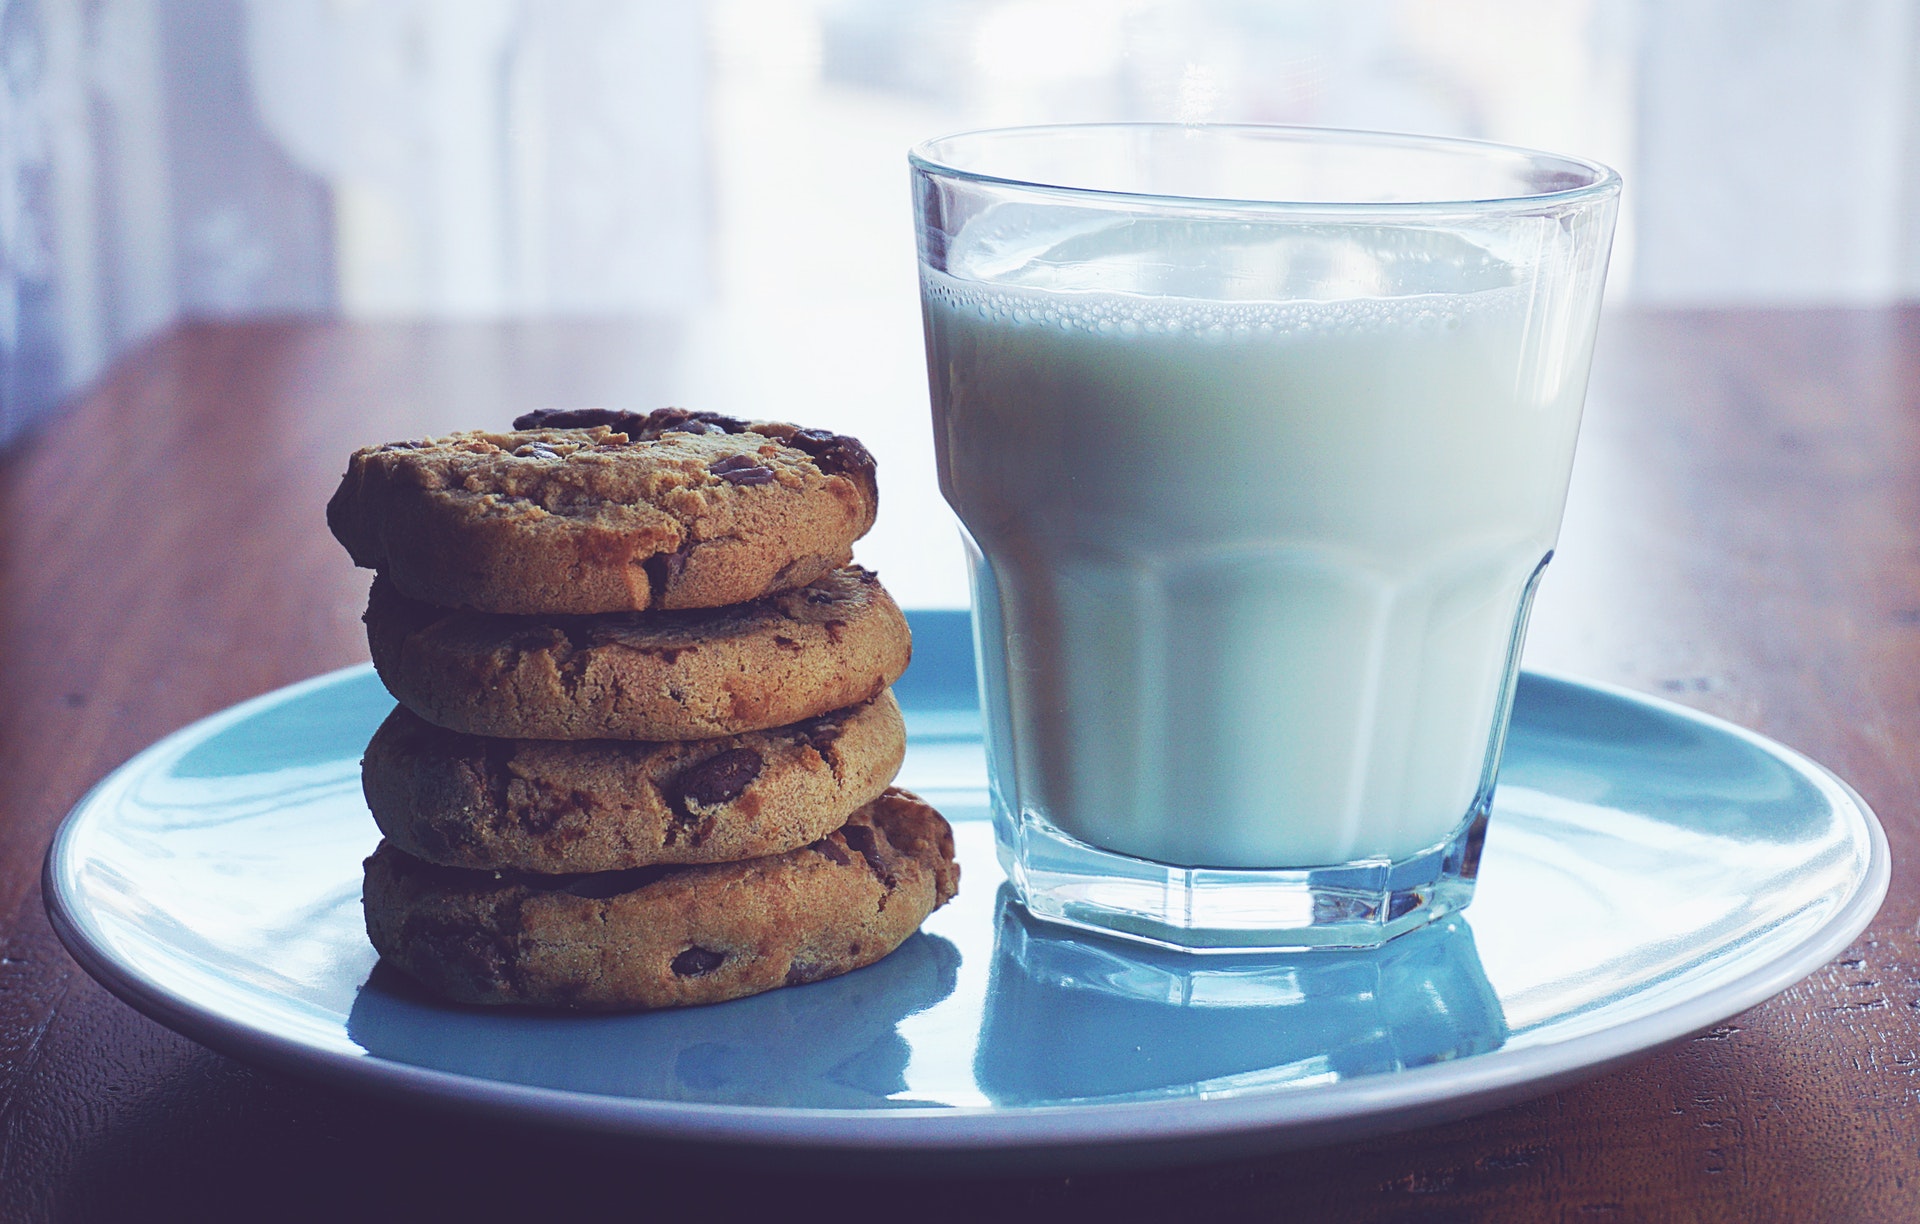 baked-cookies-and-glass-of-milk-1325467